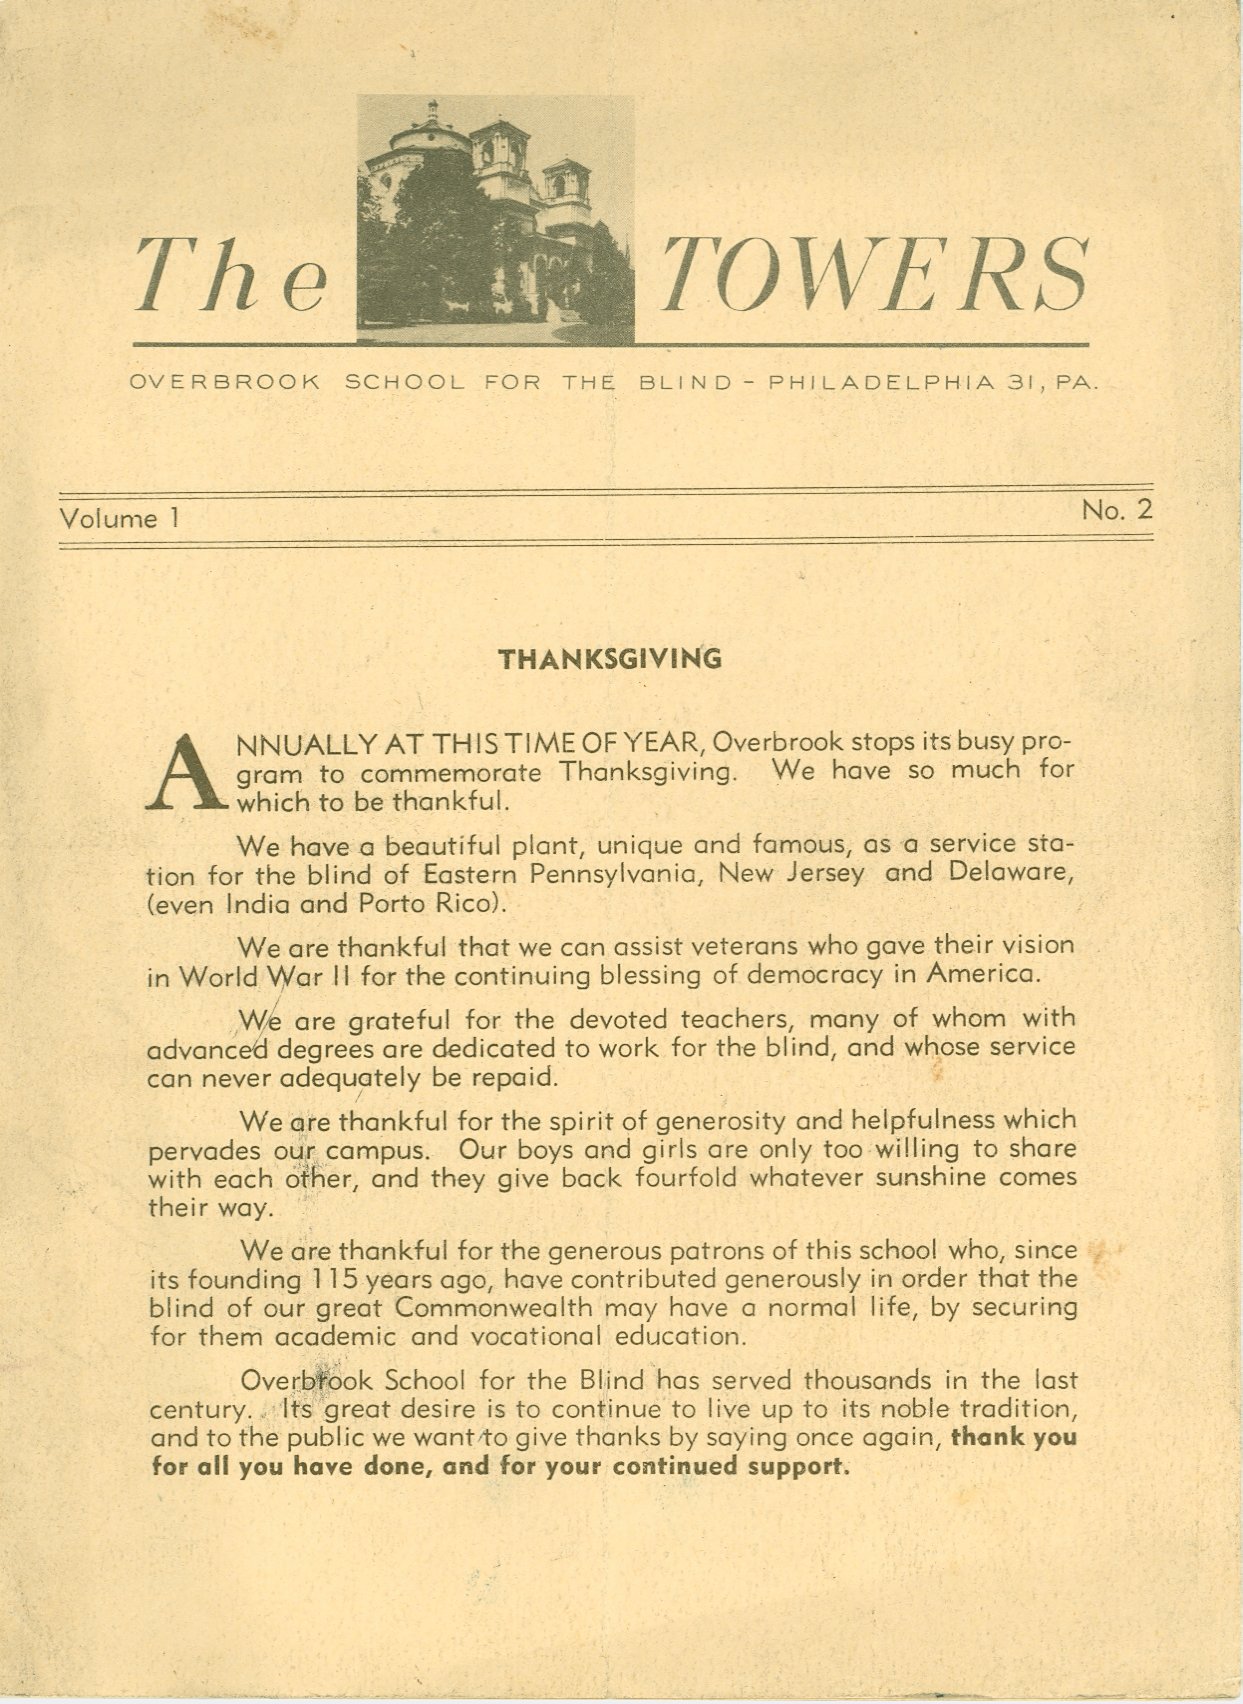 Second issue of The Towers-1